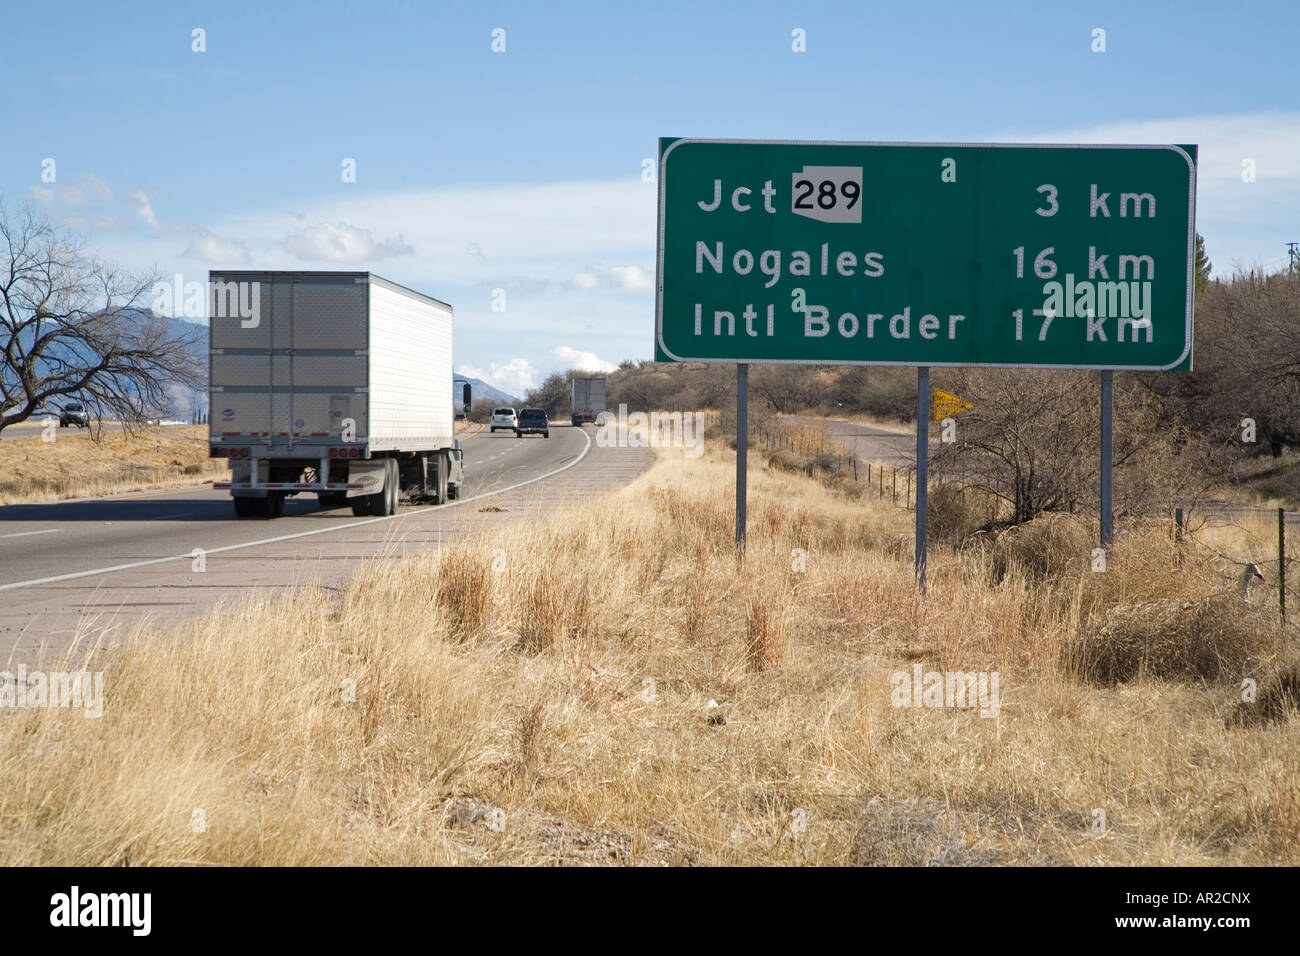 Rio Rico Arizona Road signs along Interstate 19 south of Tucson give distances in kilometers rather than miles Stock Photo